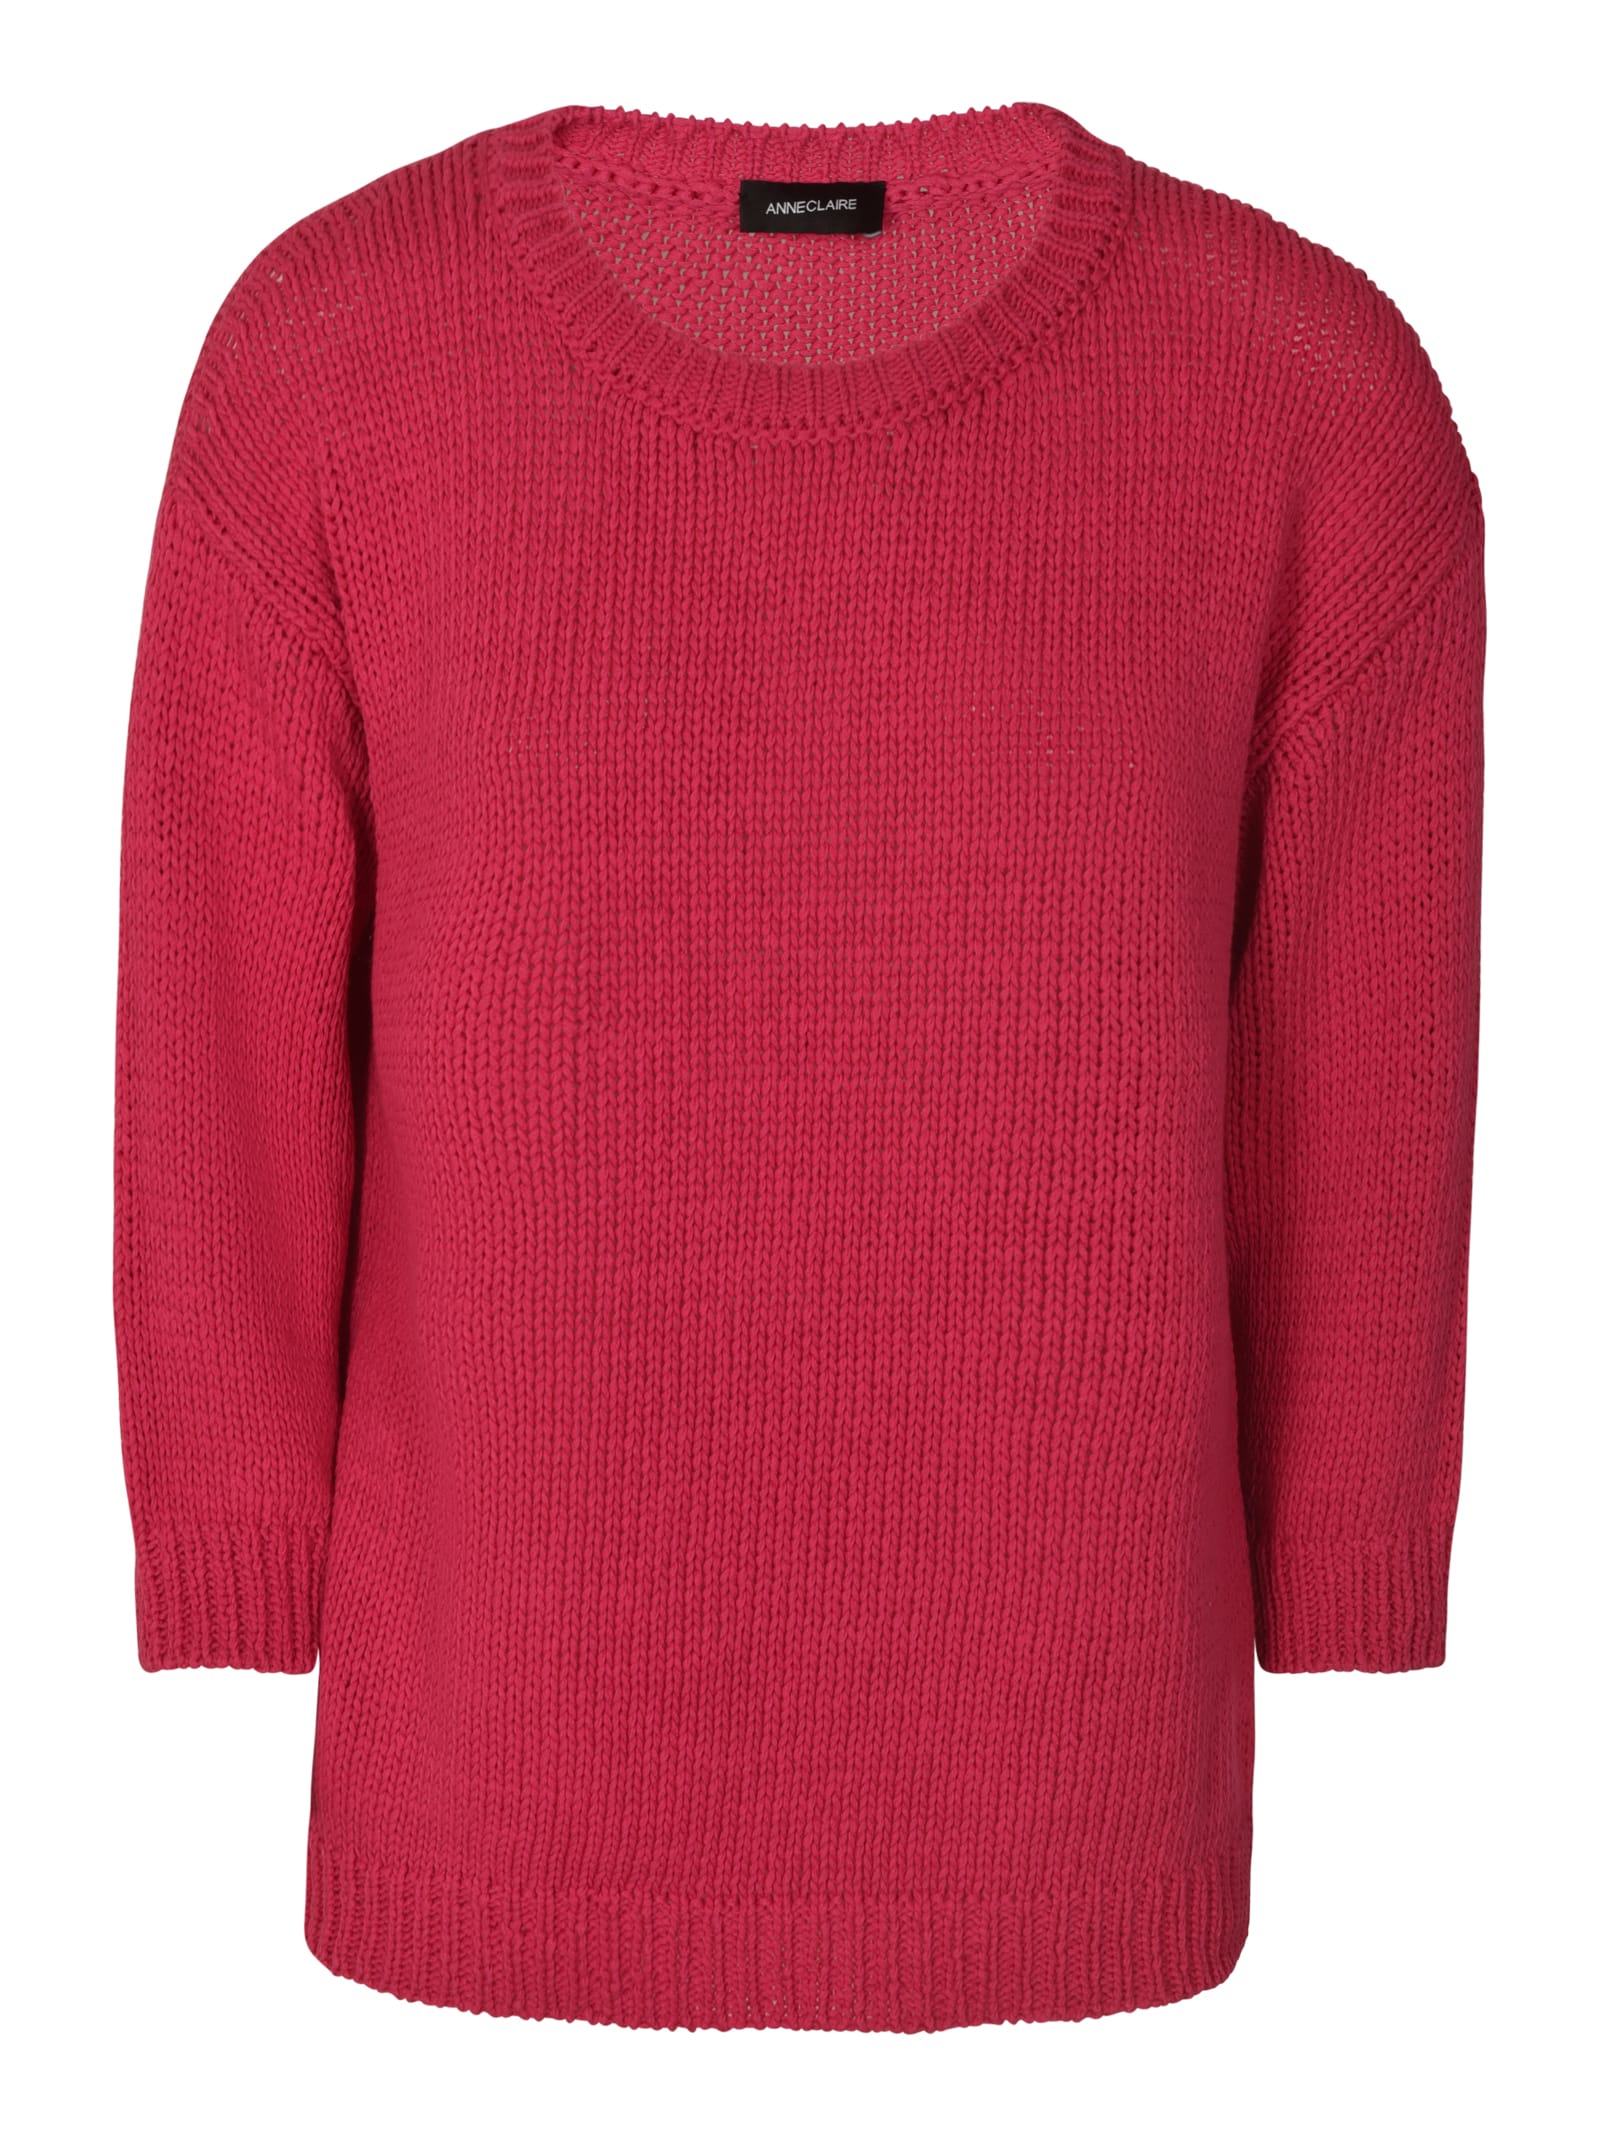 Anneclaire Ribbed Knit Jumper In Fuchsia